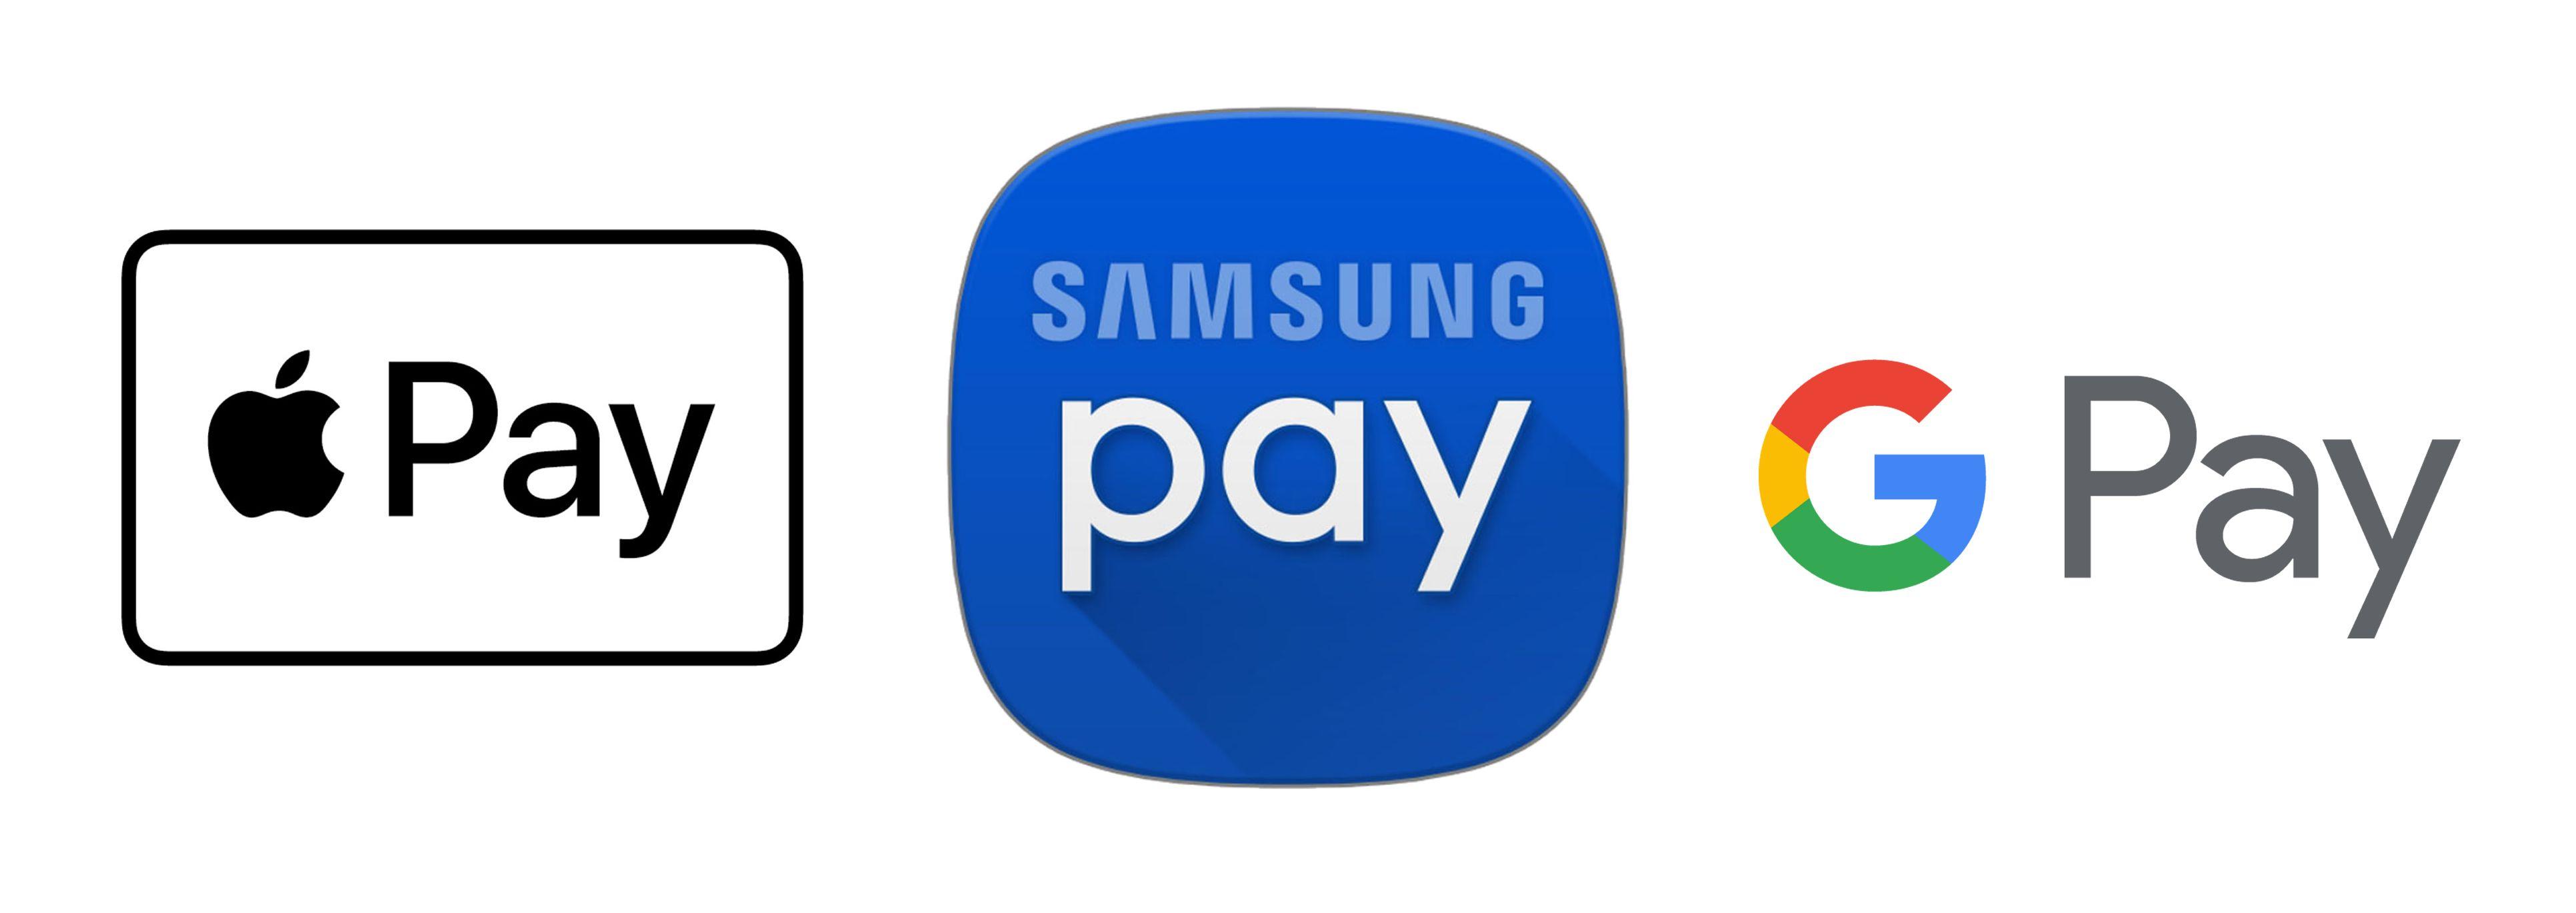 Samsung Pay Logo - Mobile Wallet | Wauna Credit Union